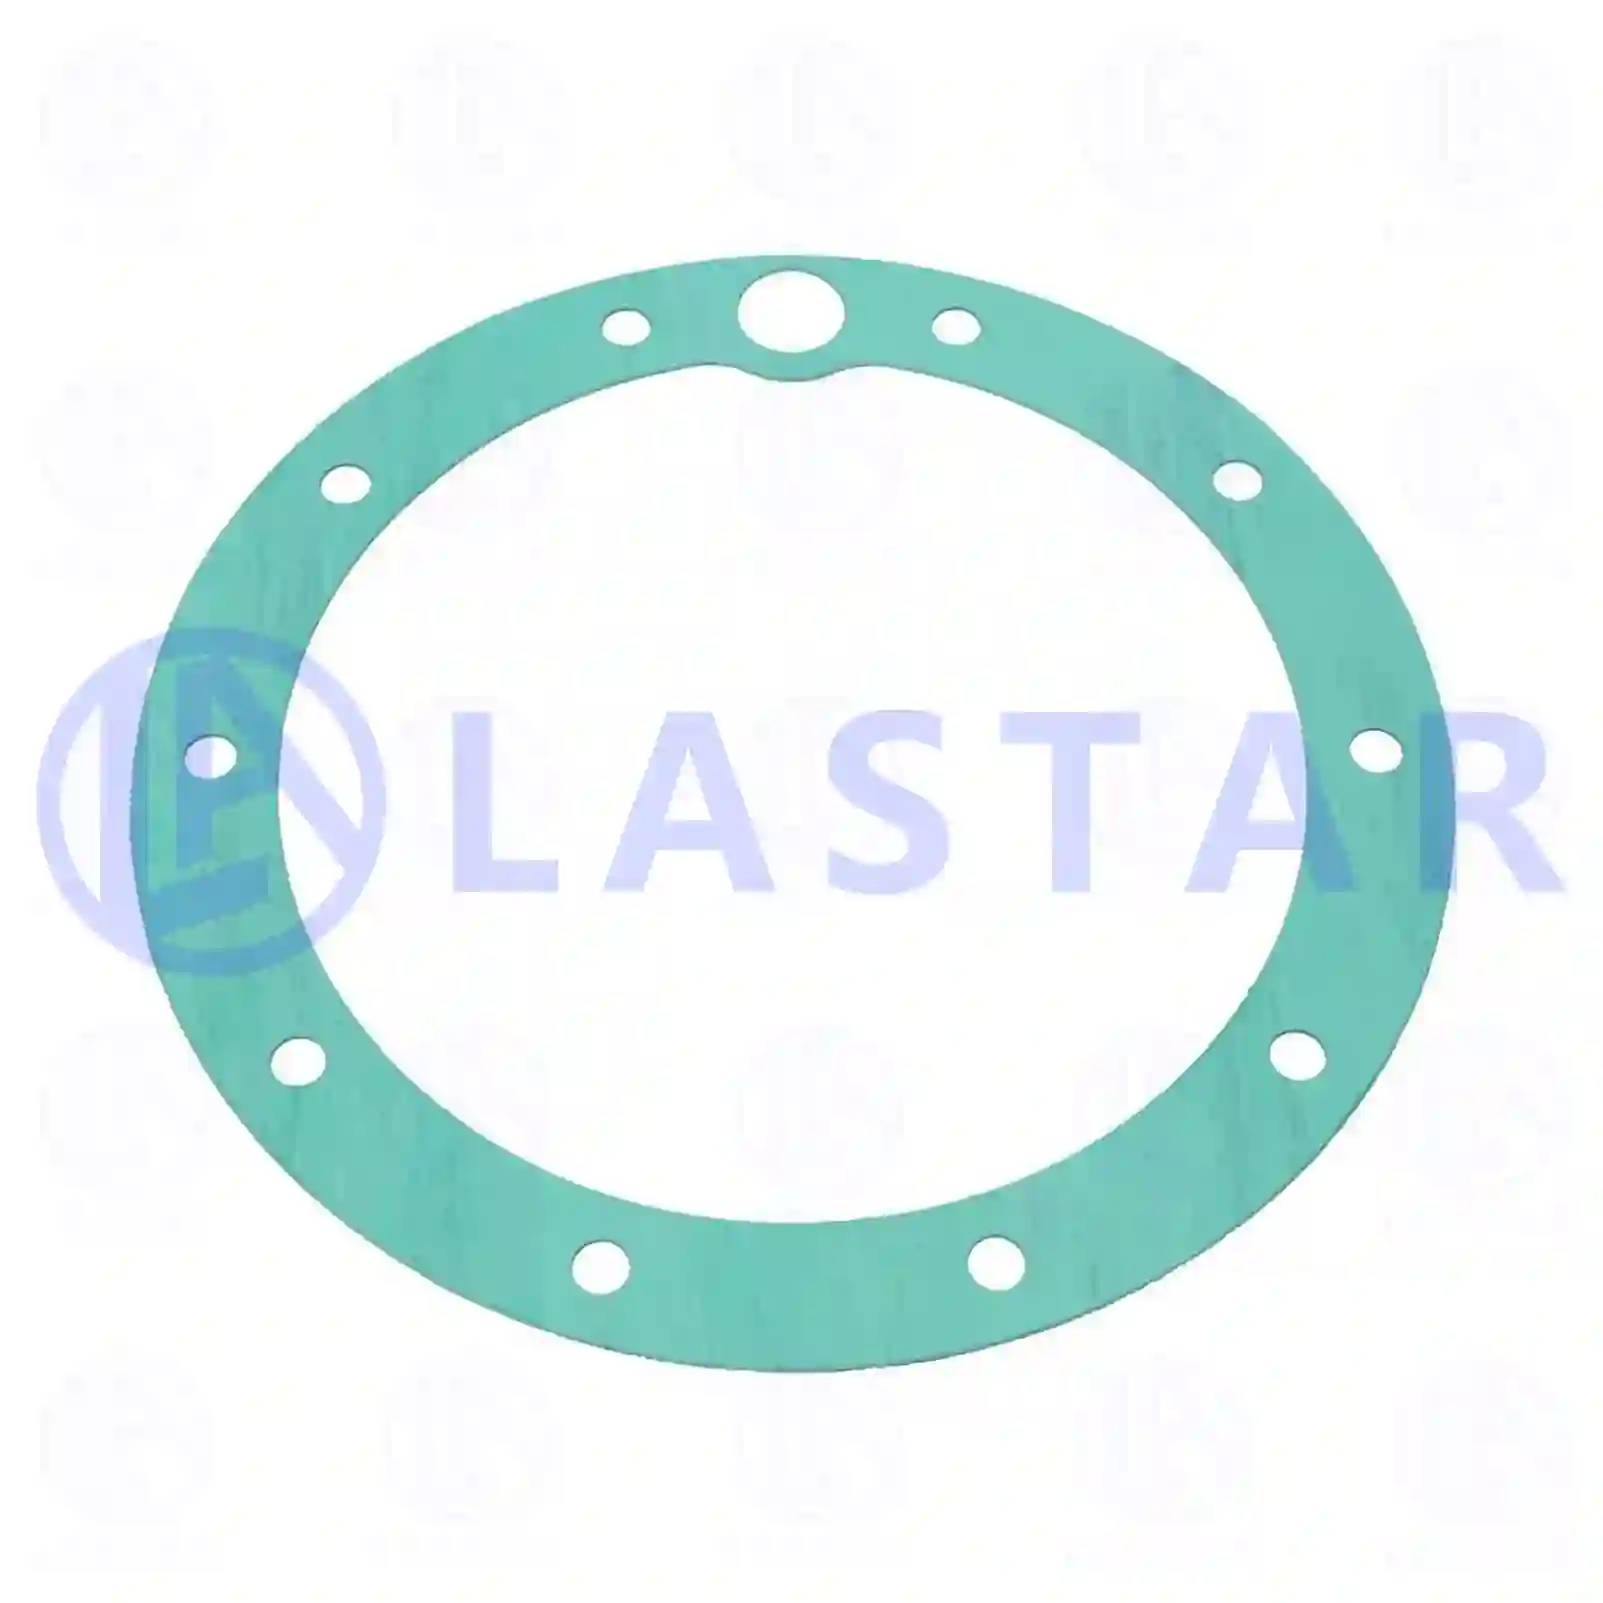 Gasket, hub cover, 77726190, 6243560080, 6503560080, ZG30034-0008 ||  77726190 Lastar Spare Part | Truck Spare Parts, Auotomotive Spare Parts Gasket, hub cover, 77726190, 6243560080, 6503560080, ZG30034-0008 ||  77726190 Lastar Spare Part | Truck Spare Parts, Auotomotive Spare Parts